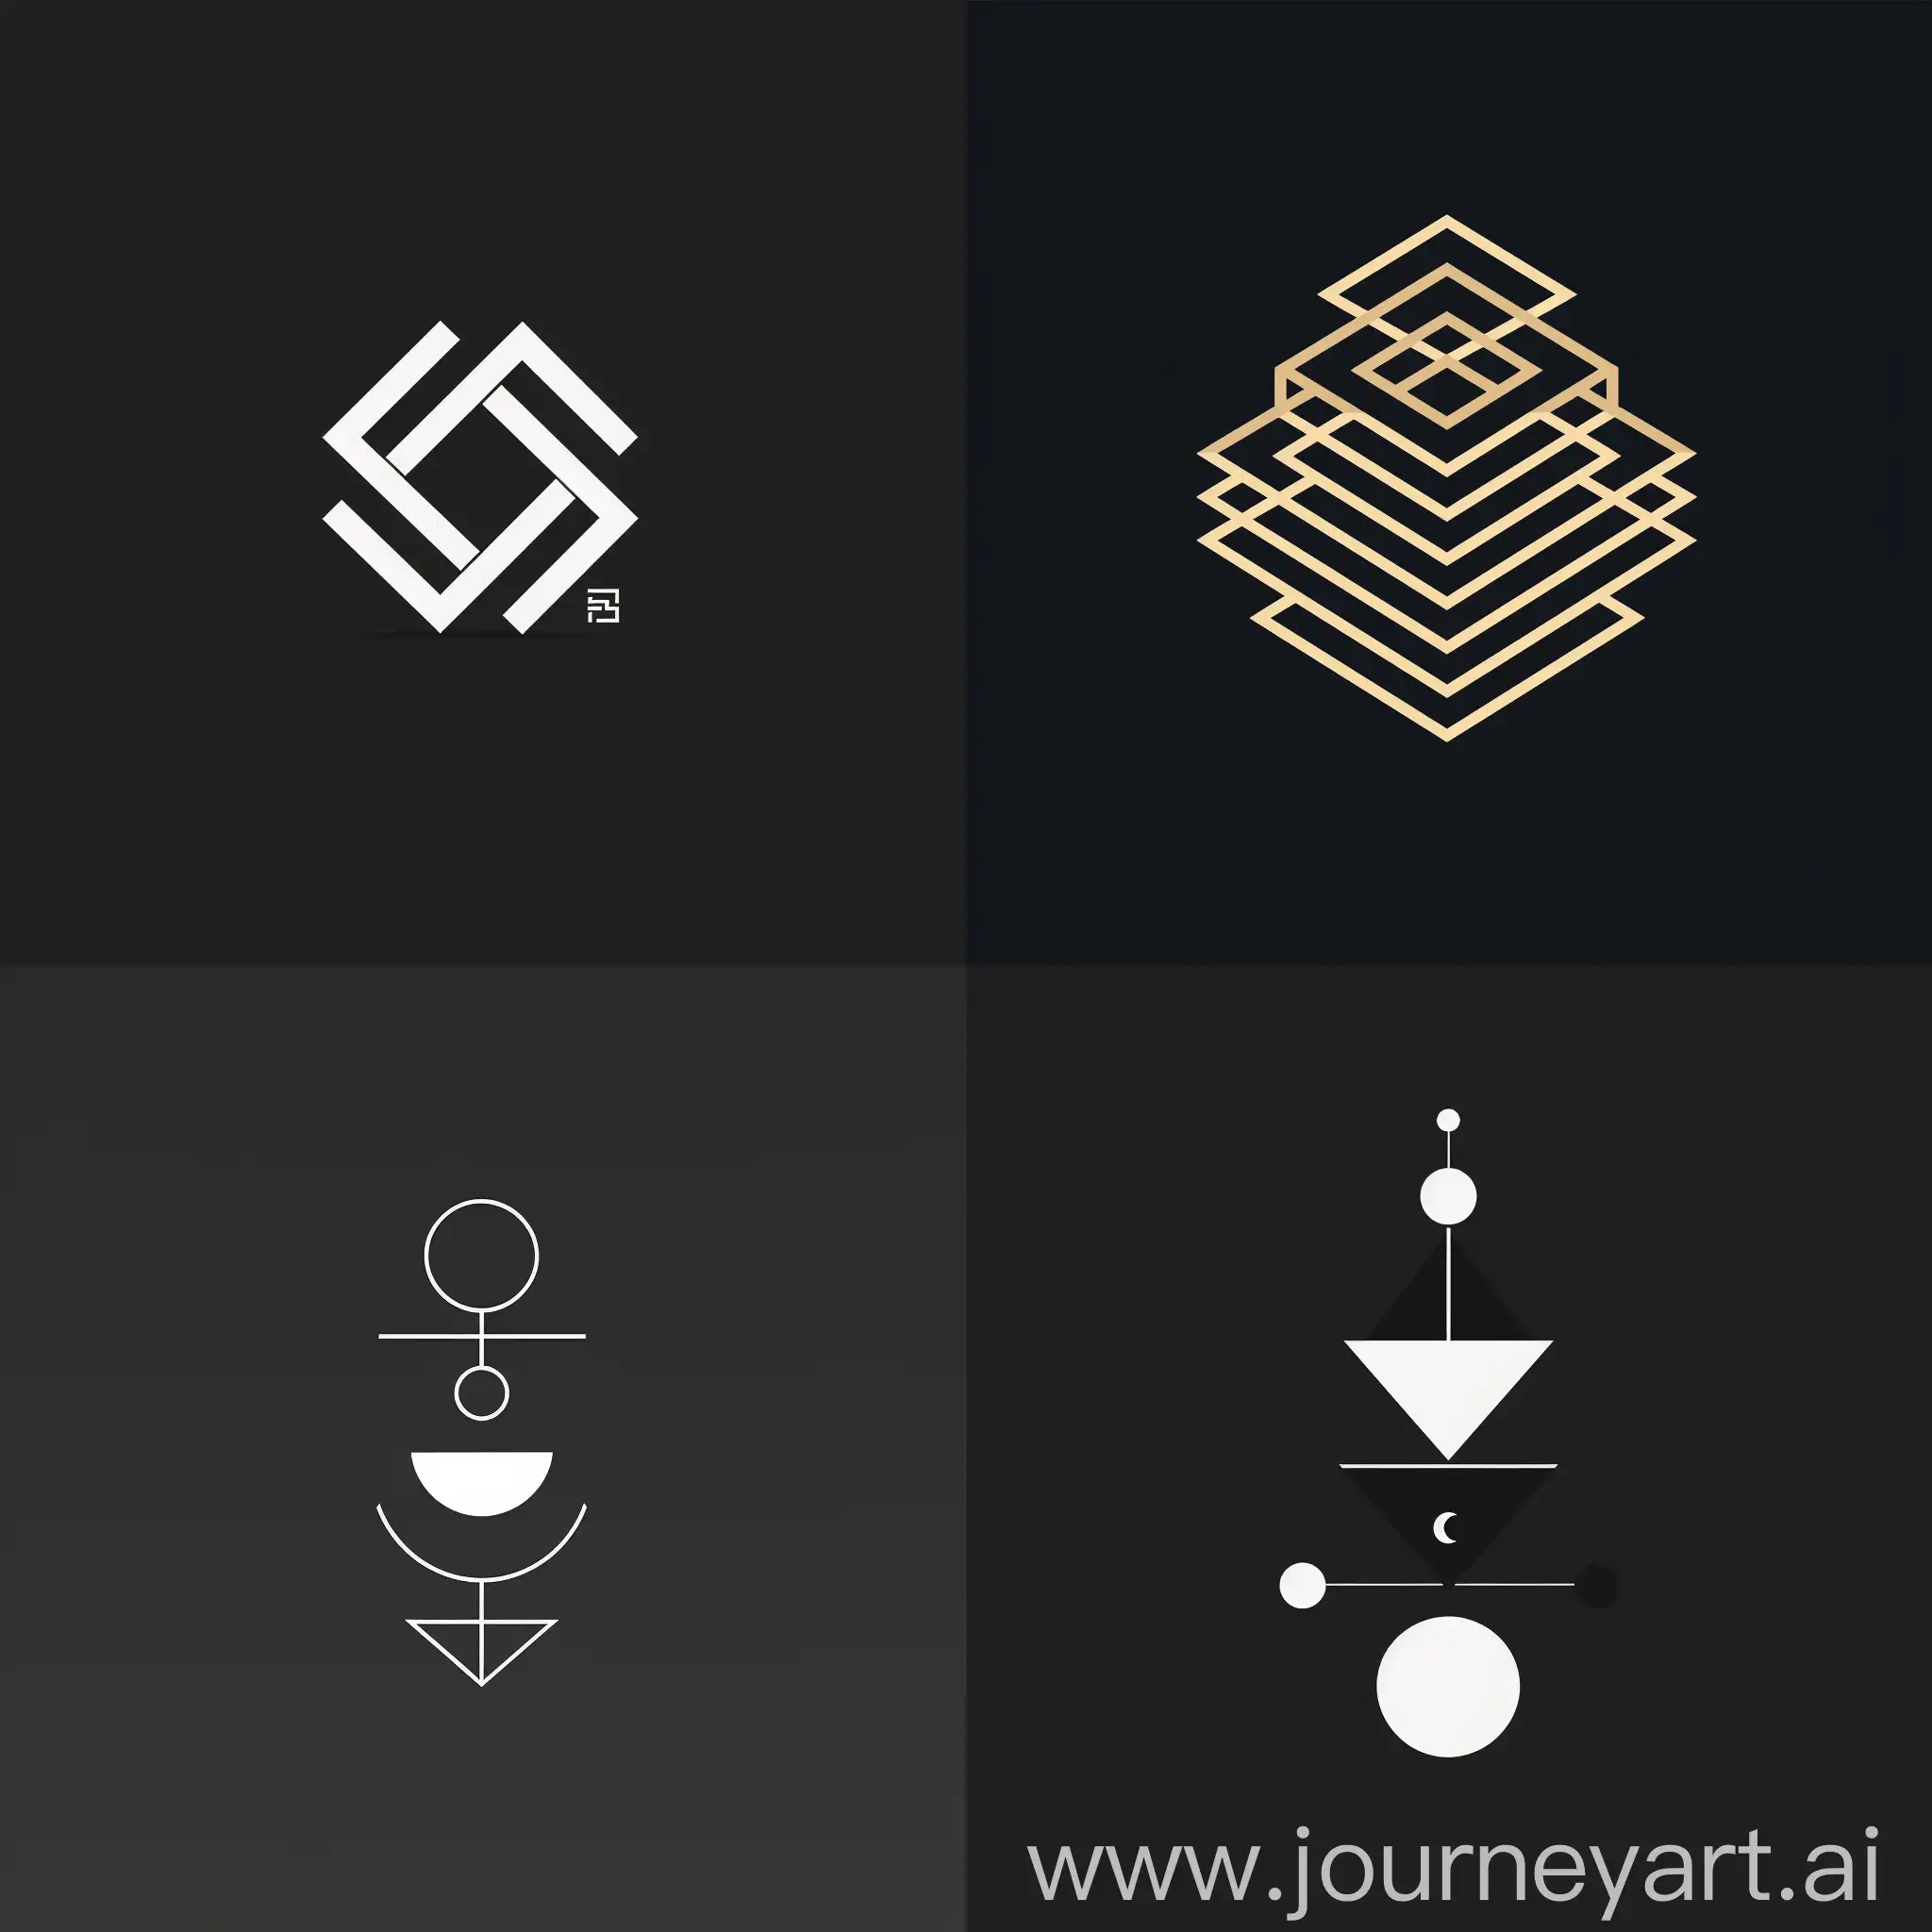 Minimalistic-Logo-Design-with-Emphasis-on-Structure-and-Hierarchy